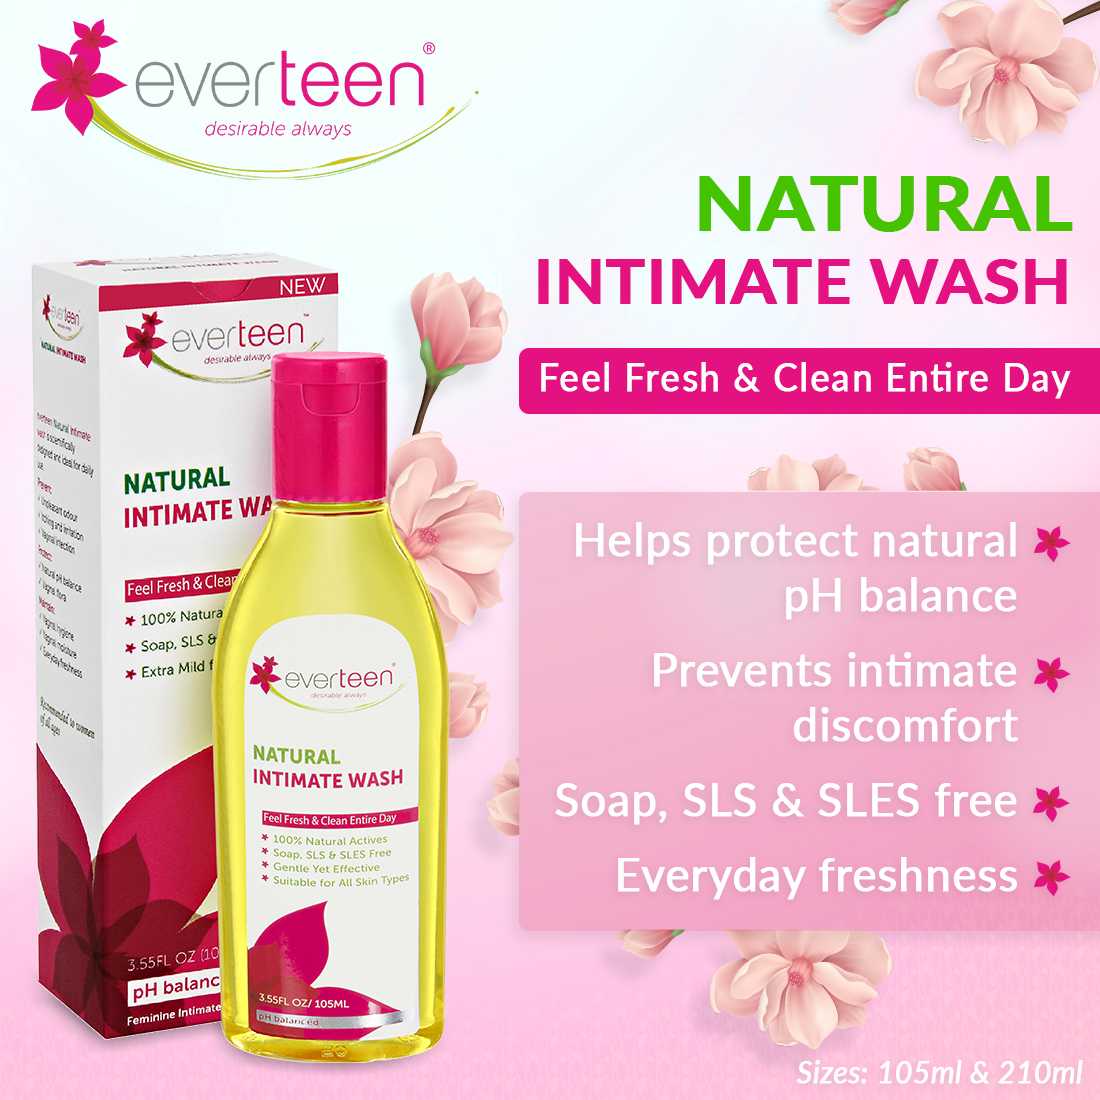 everteen Value Combo - Bikini Line Hair Remover Creme SILKY and Natural Intimate Wash 105ml for Women - everteen